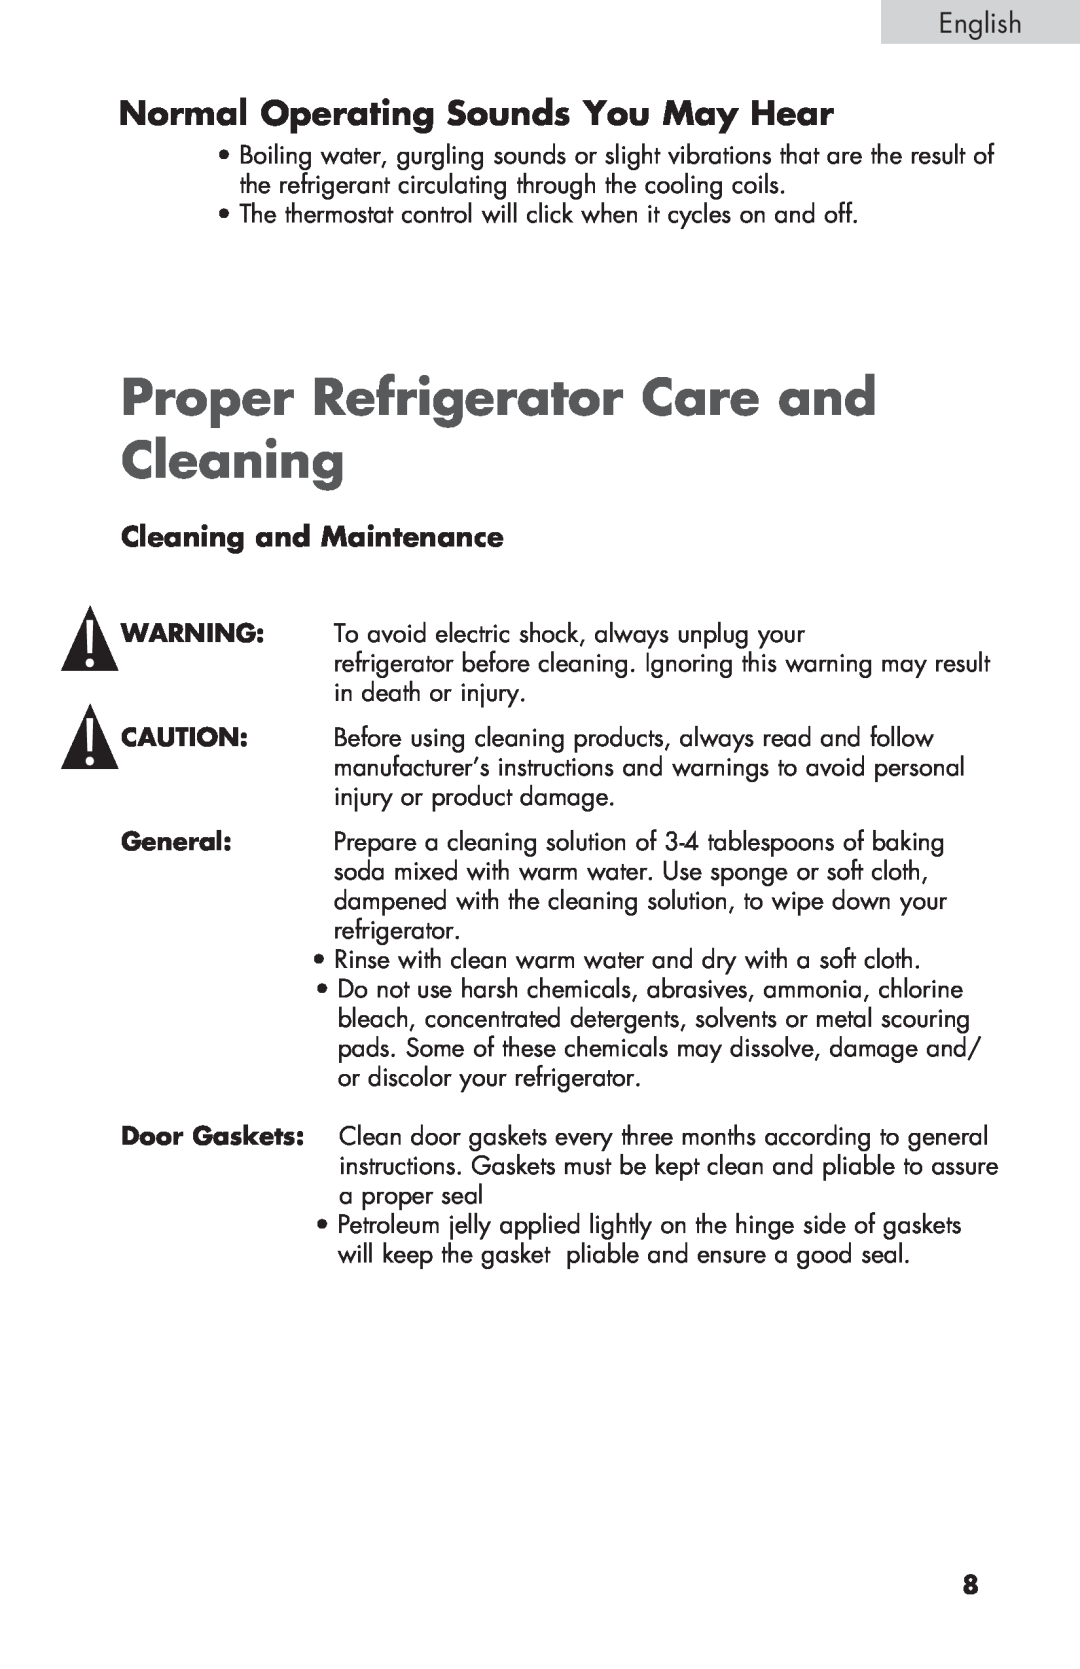 Haier BCF27B manual Proper Refrigerator Care and Cleaning, Normal Operating Sounds You May Hear, Cleaning and Maintenance 